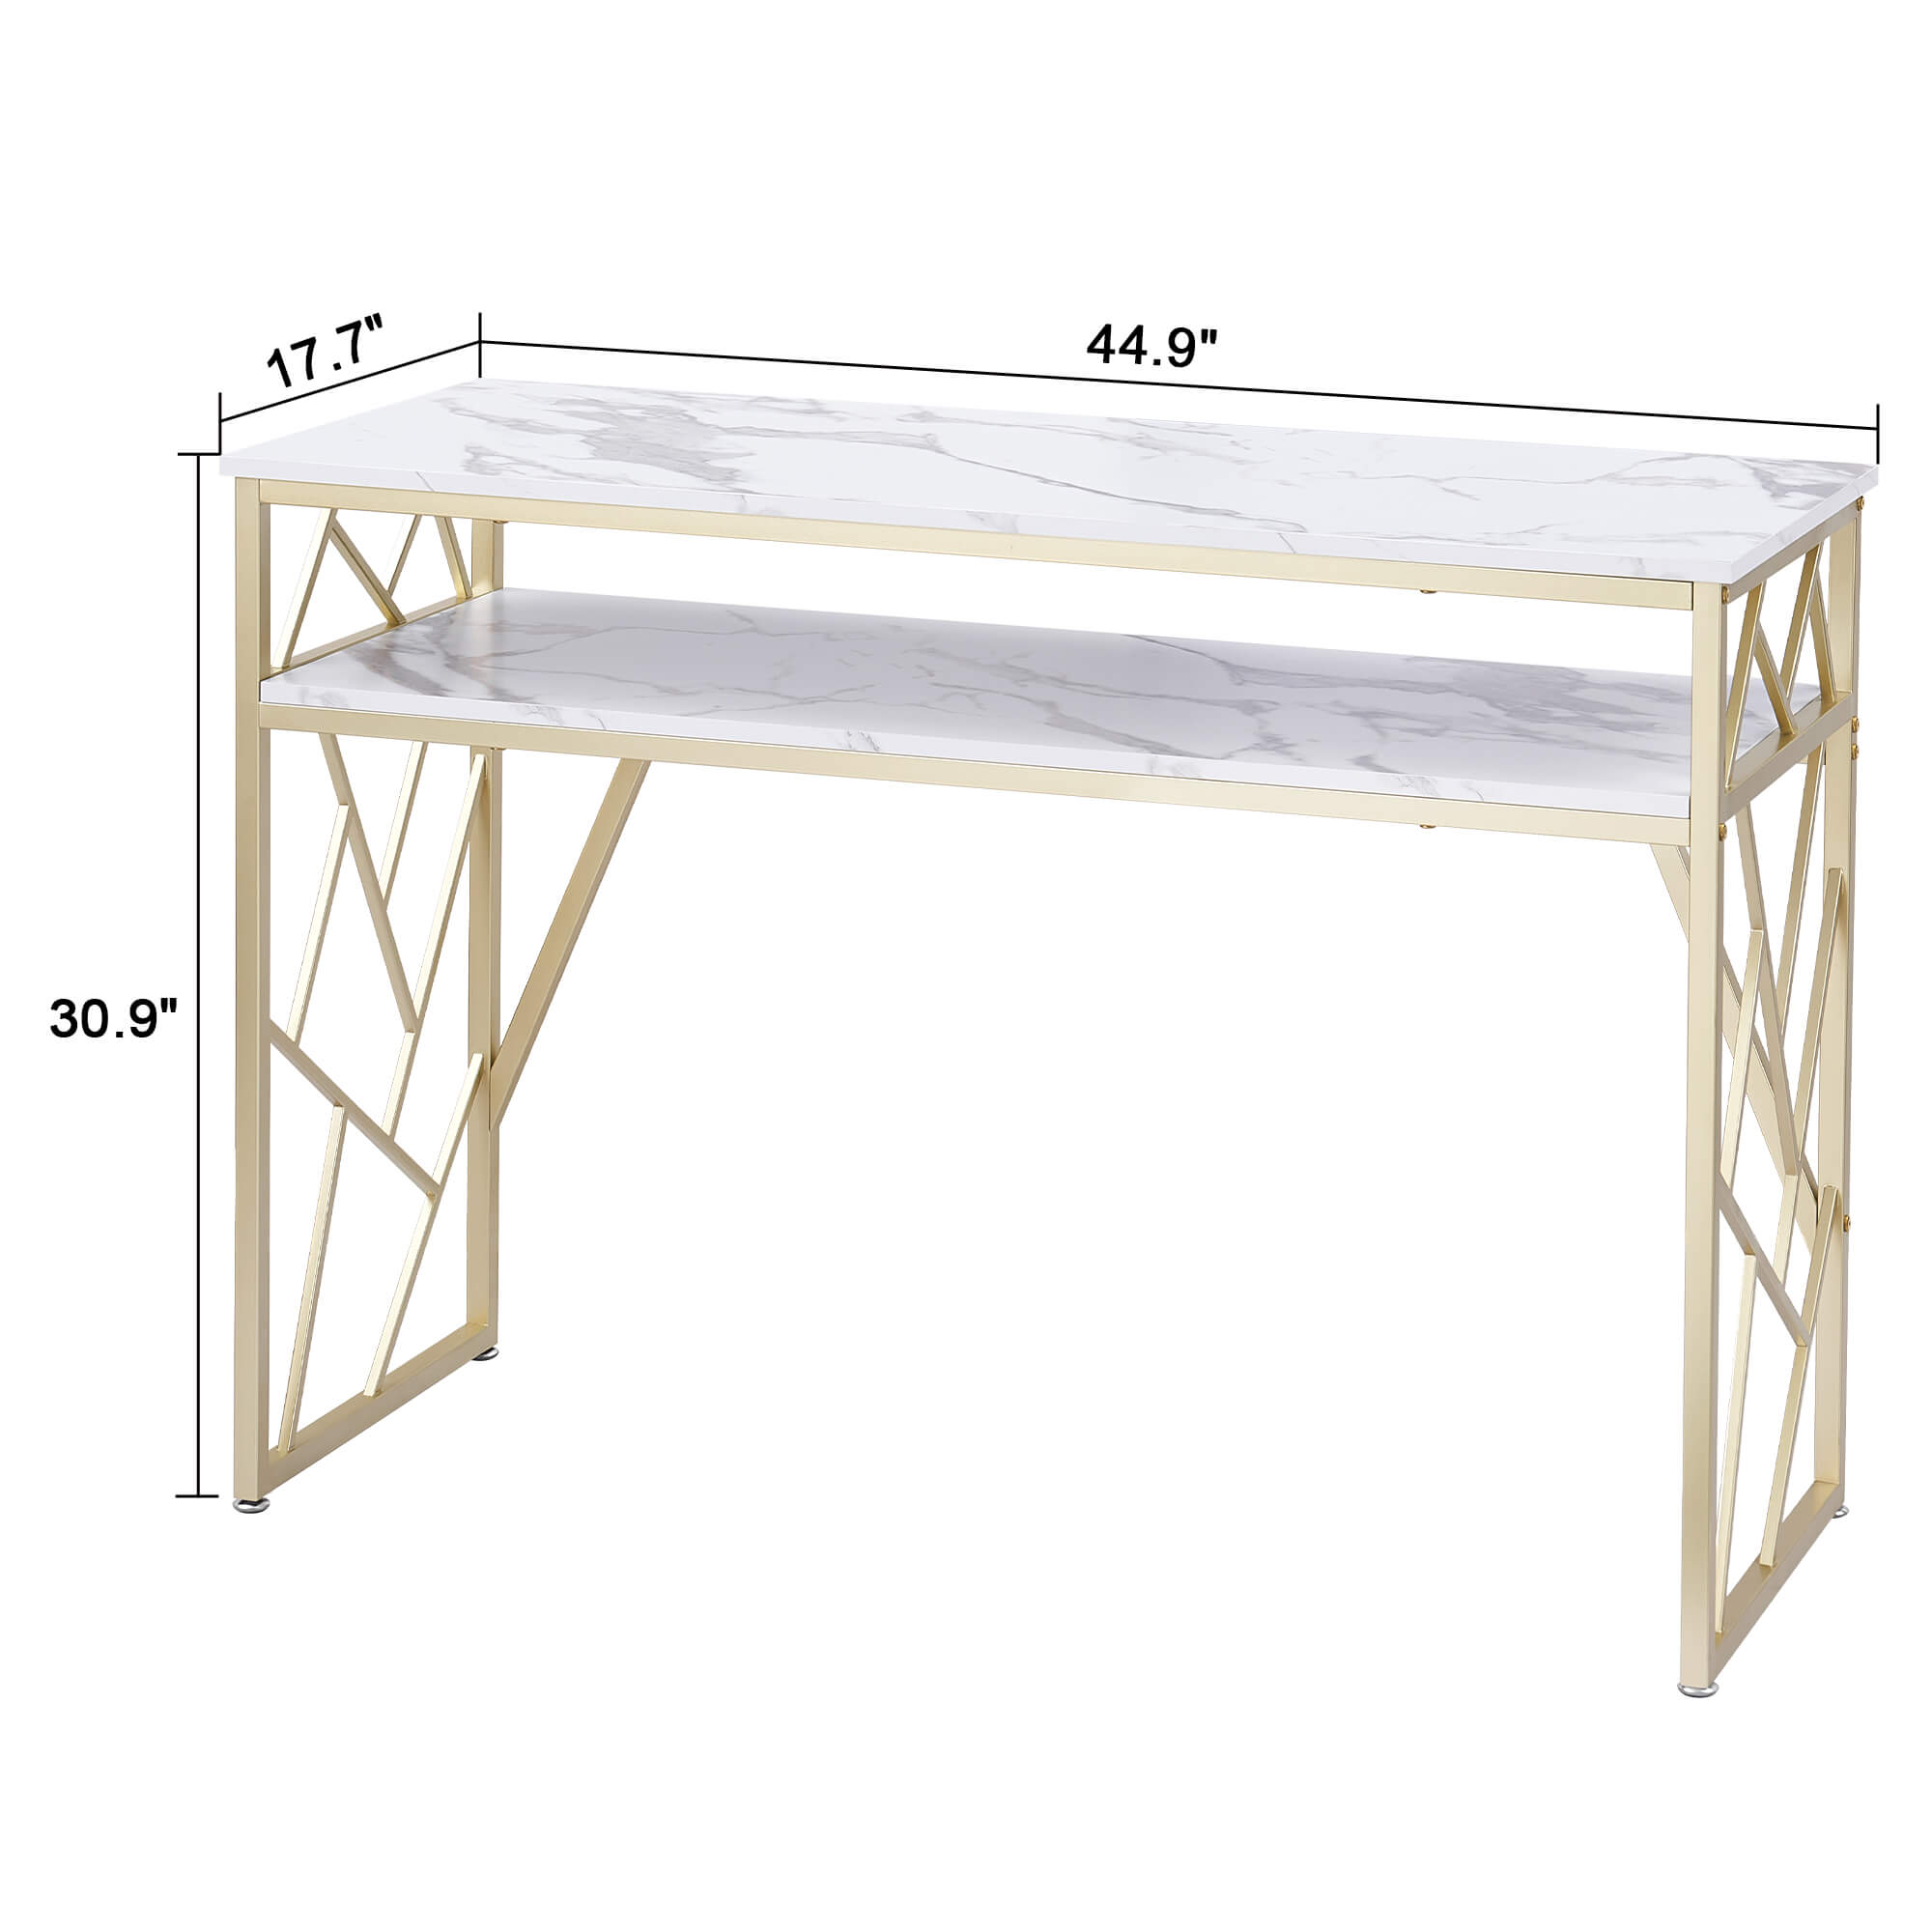 Ivinta Narrow Console Table with Storage, Modern Sofa Table for Living Room